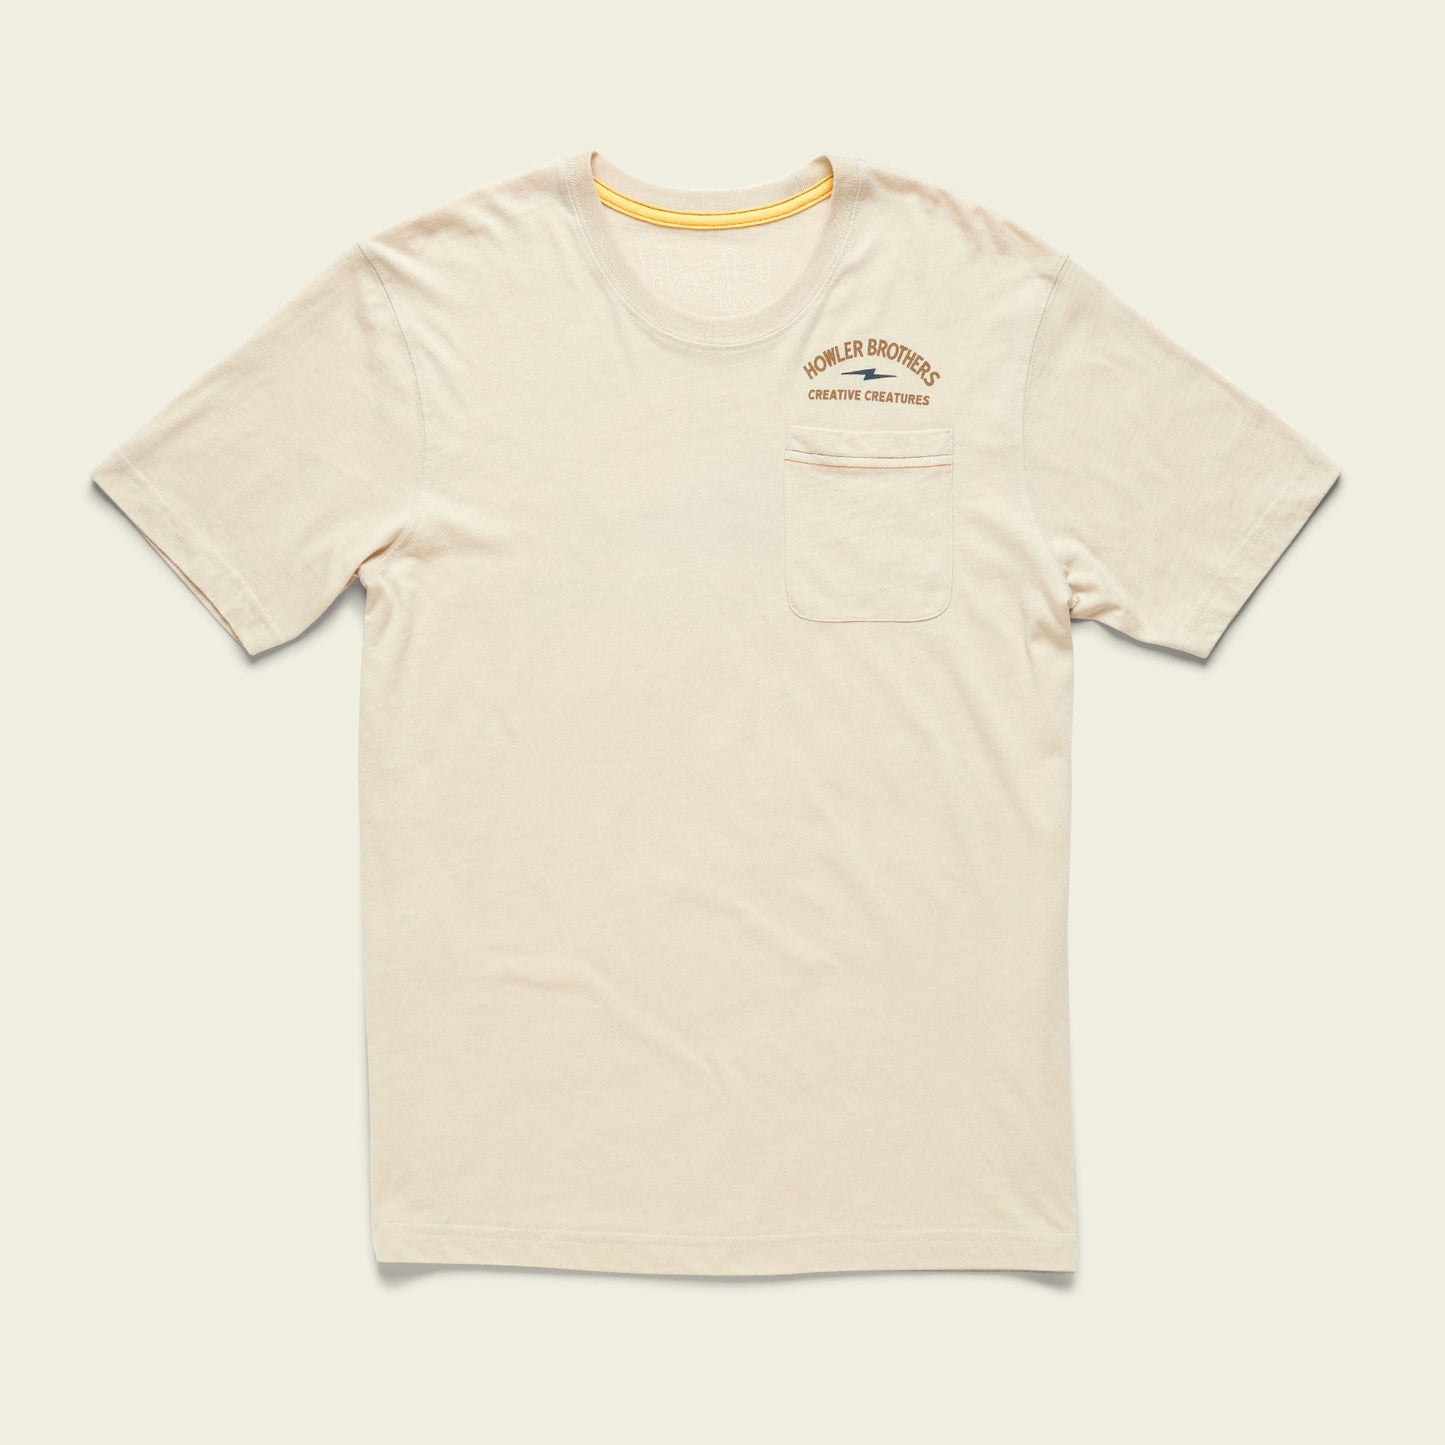 Select Pocket T - Creative Creatures Roosterfish: Sand Heather